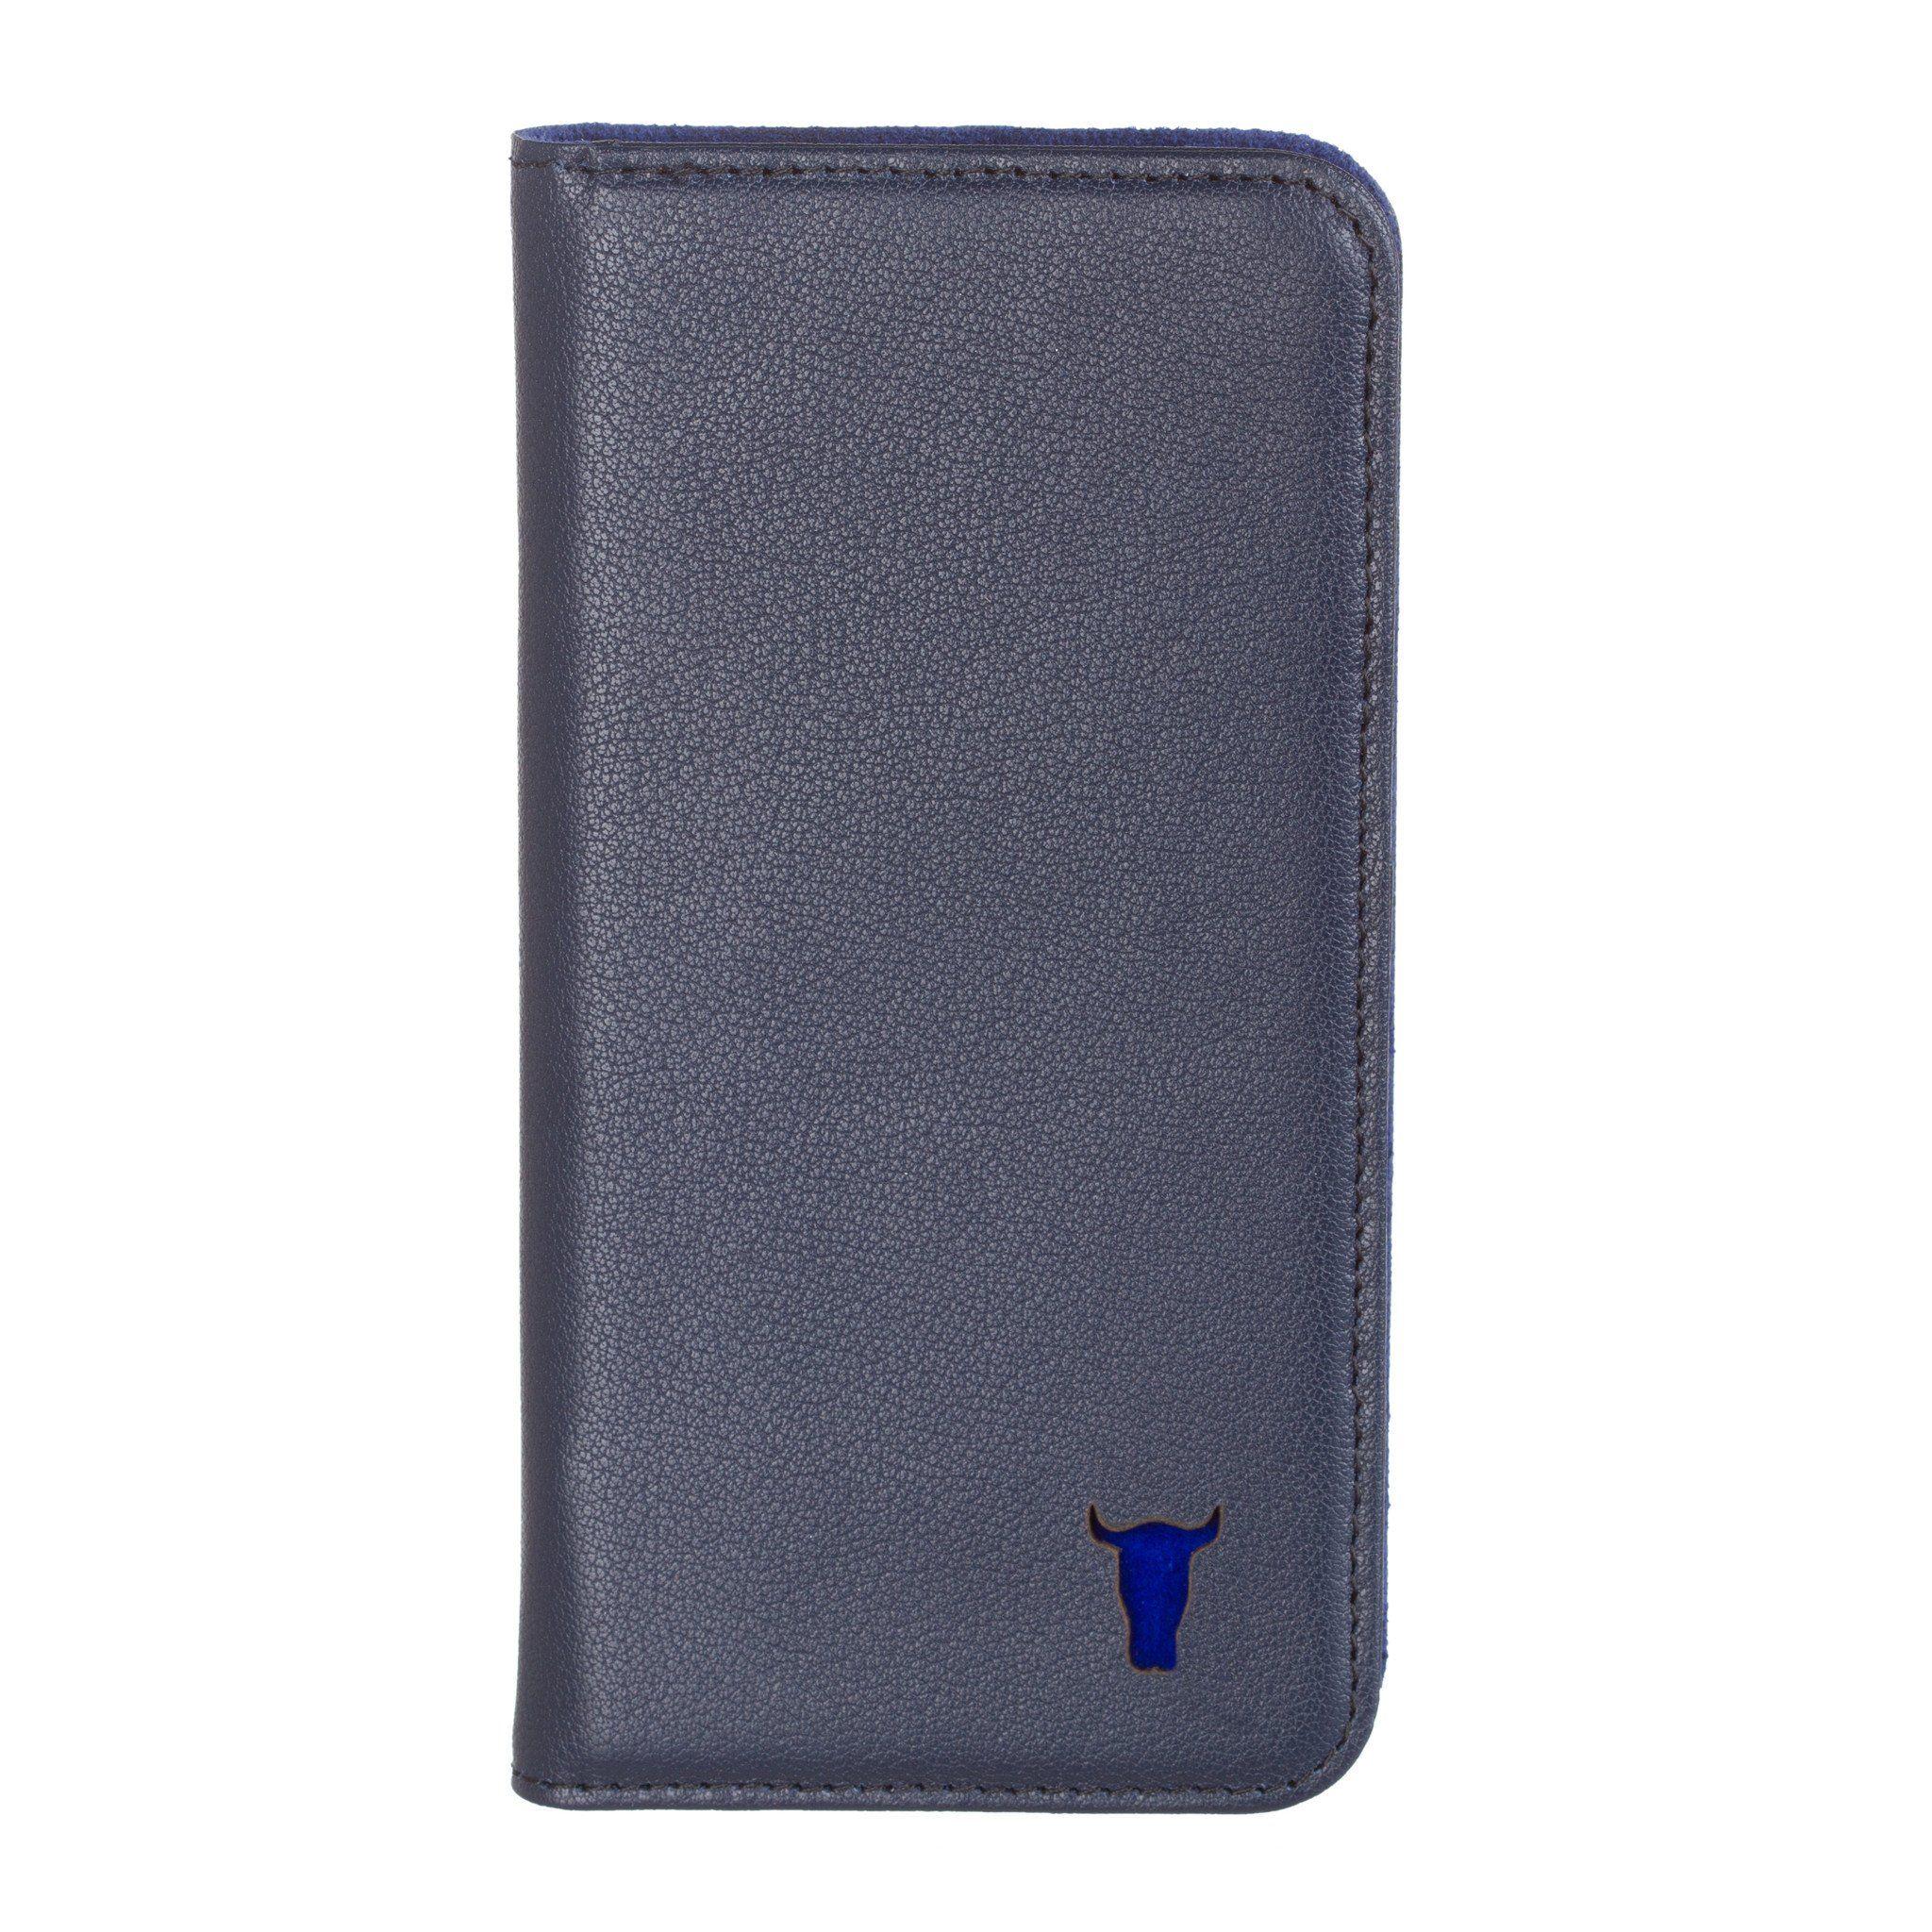 Blue Samsung Galaxy Logo - Samsung Galaxy S7 Edge Navy Blue Leather Case, with Stand Function ...